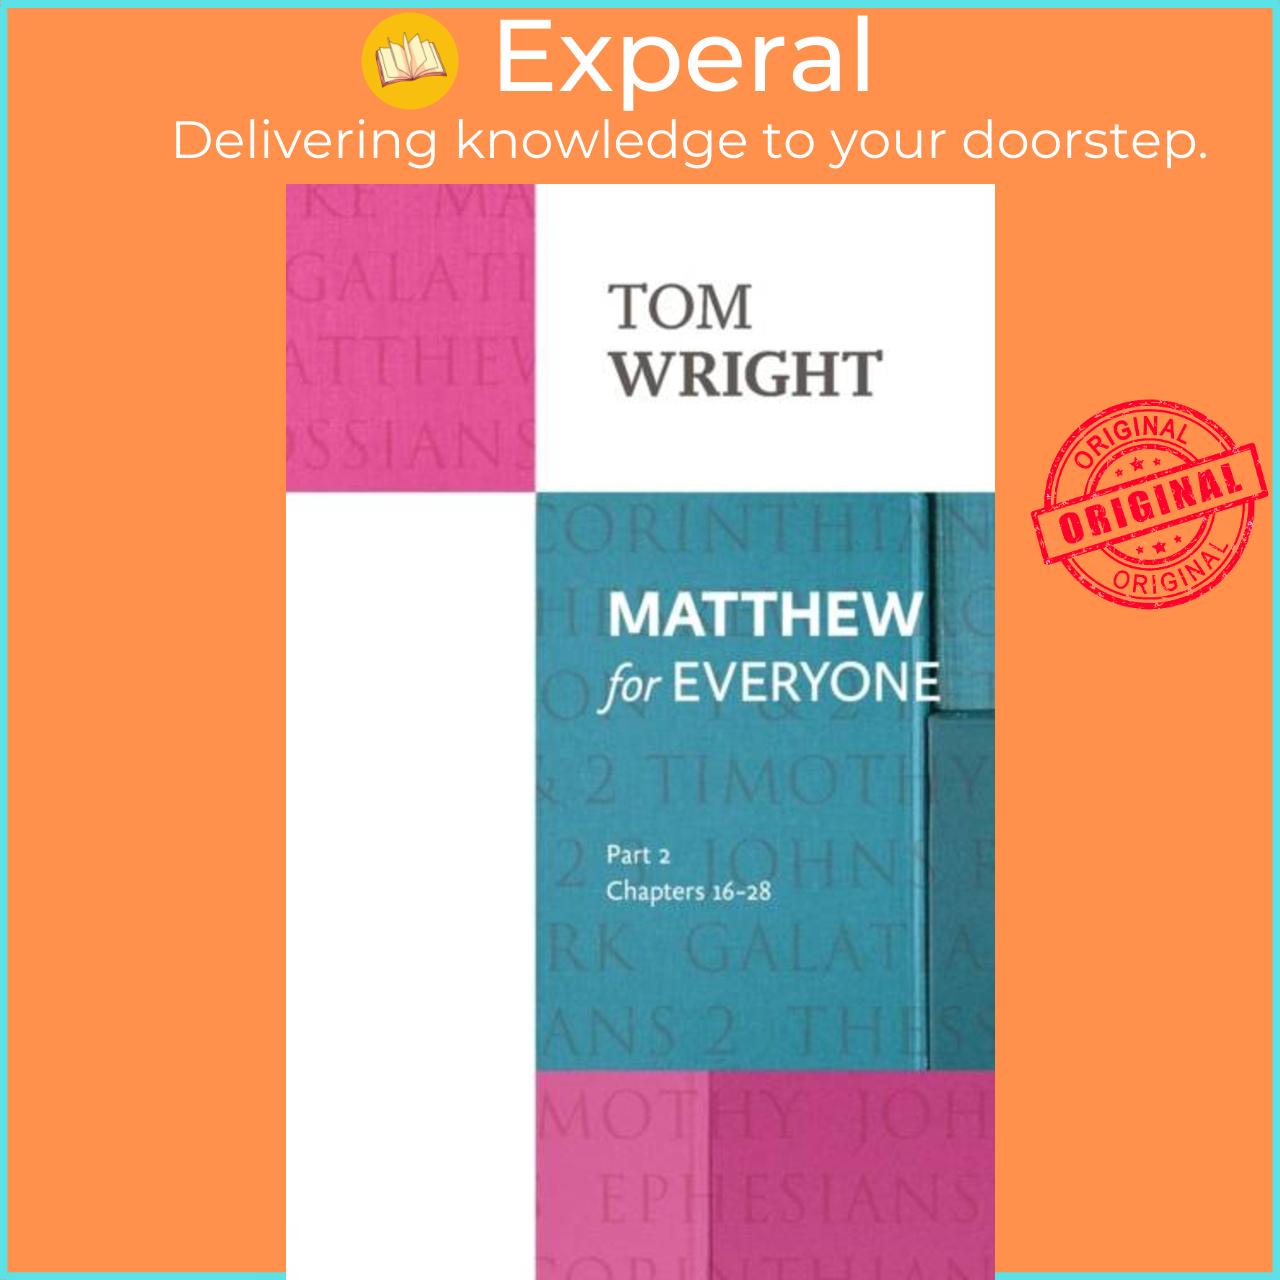 Hình ảnh Sách - Matthew for Everyone: Part 2 - chapters 16-28 by Tom Wright (UK edition, paperback)